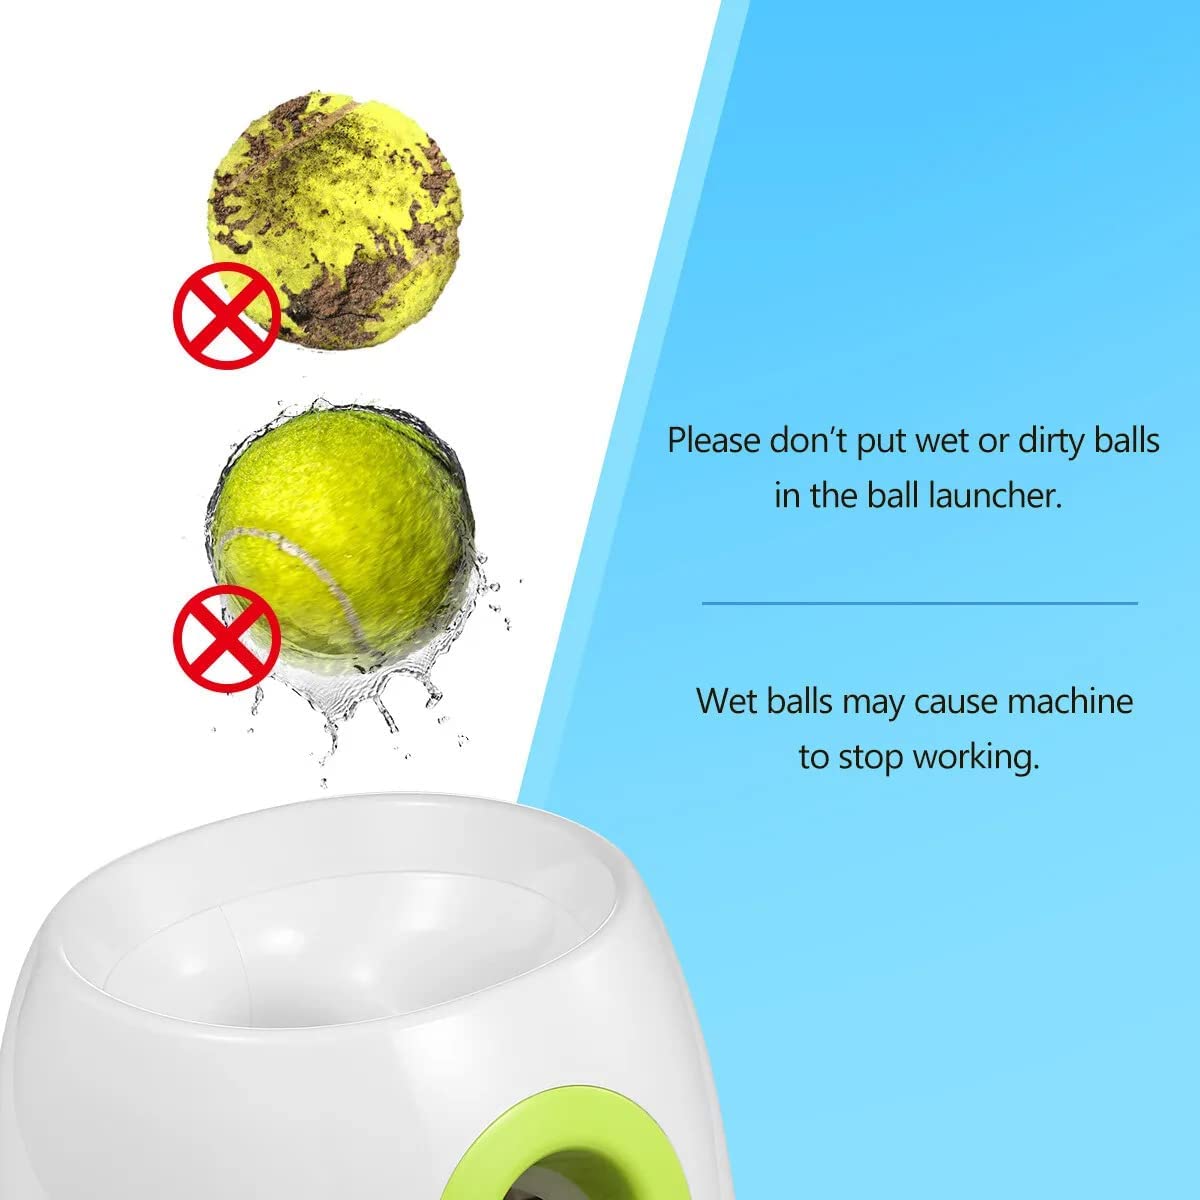 All For Paws Hyper Fetch (Mini) Automatic Ball Launcher Interactive Dog Toy